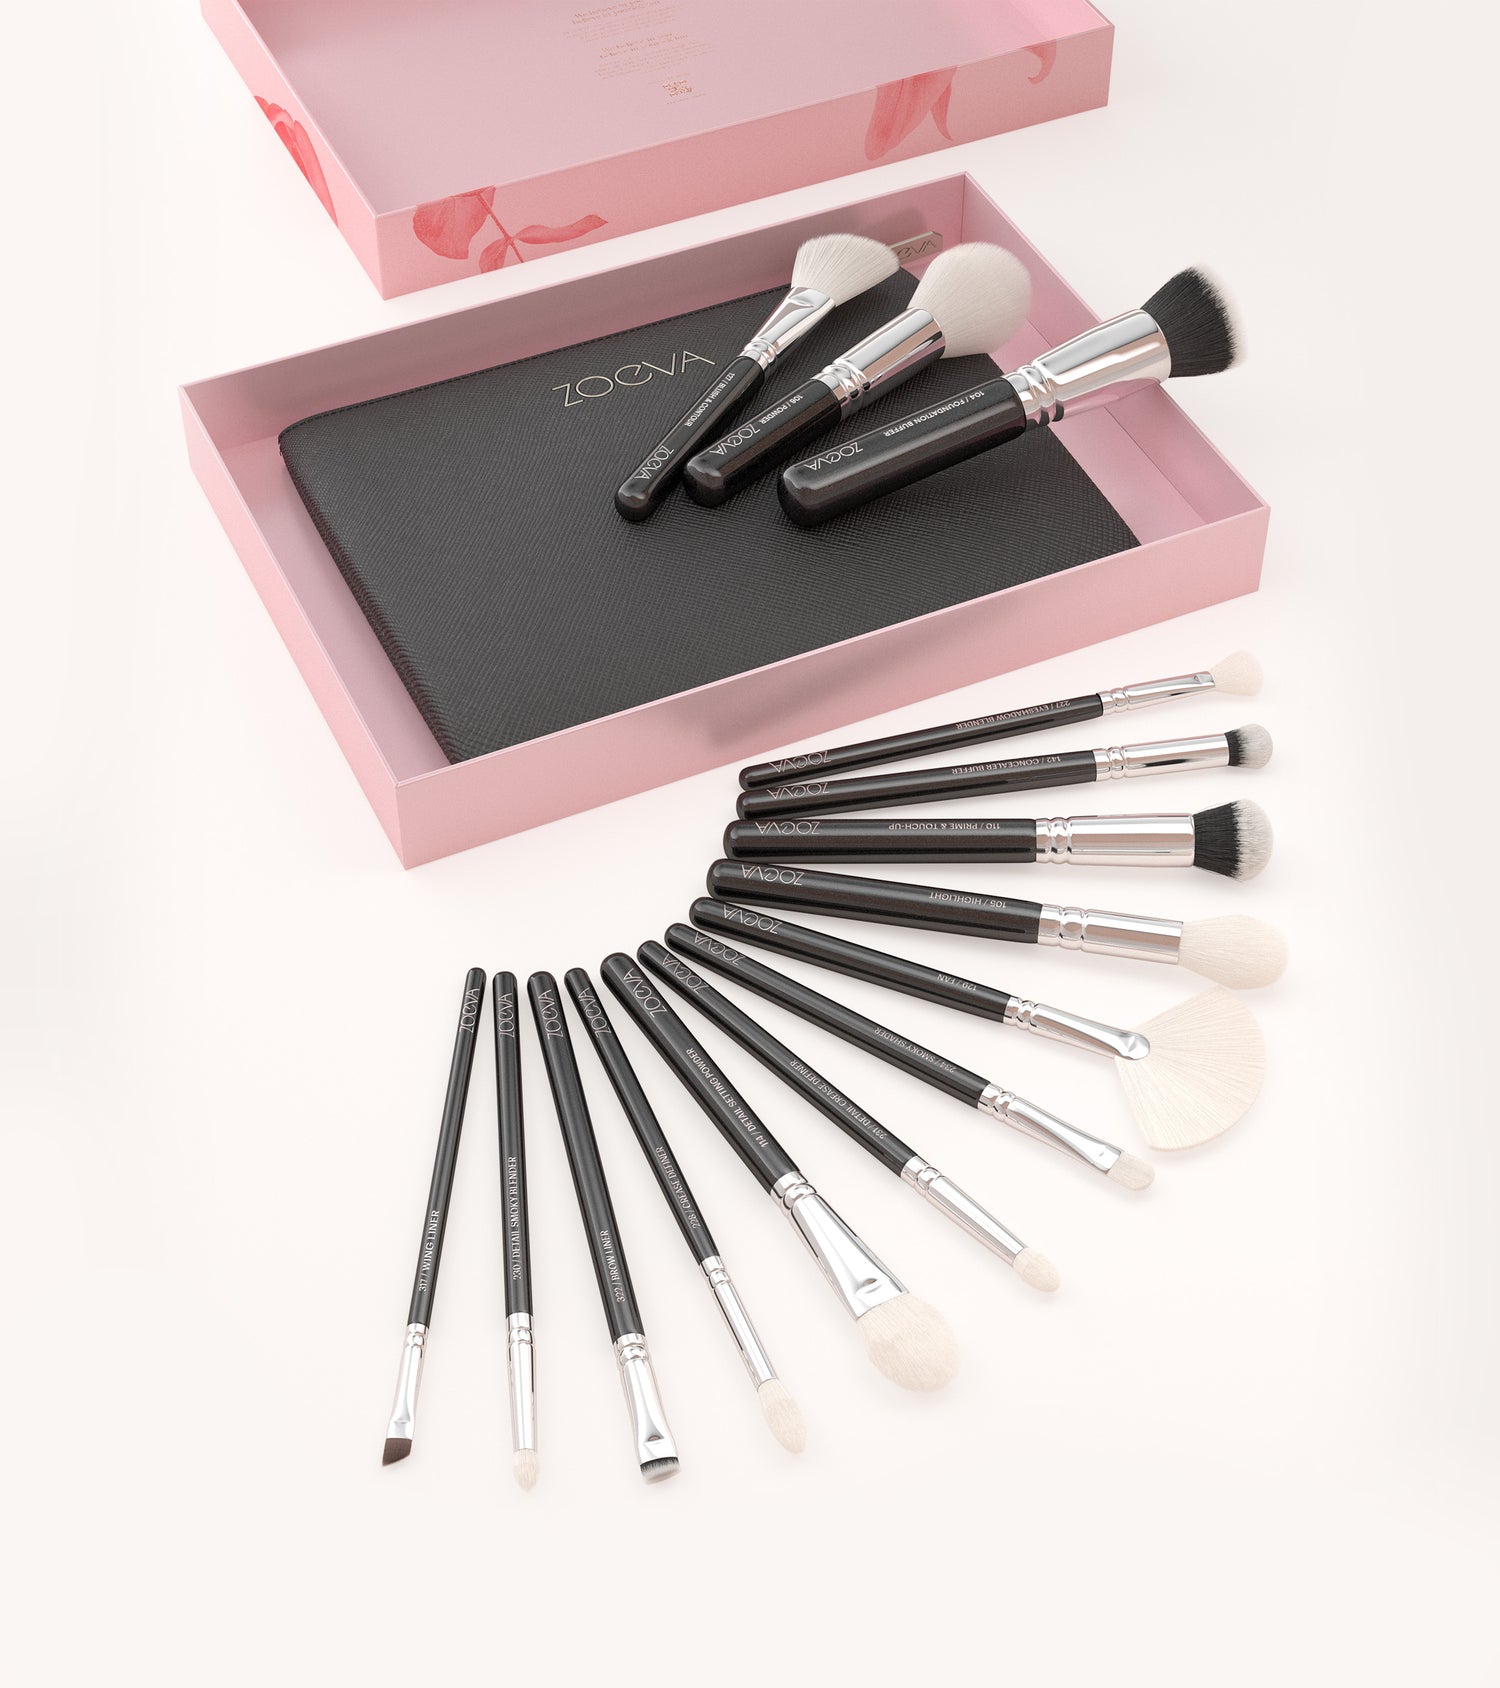 All Makeup Brushes & Sets